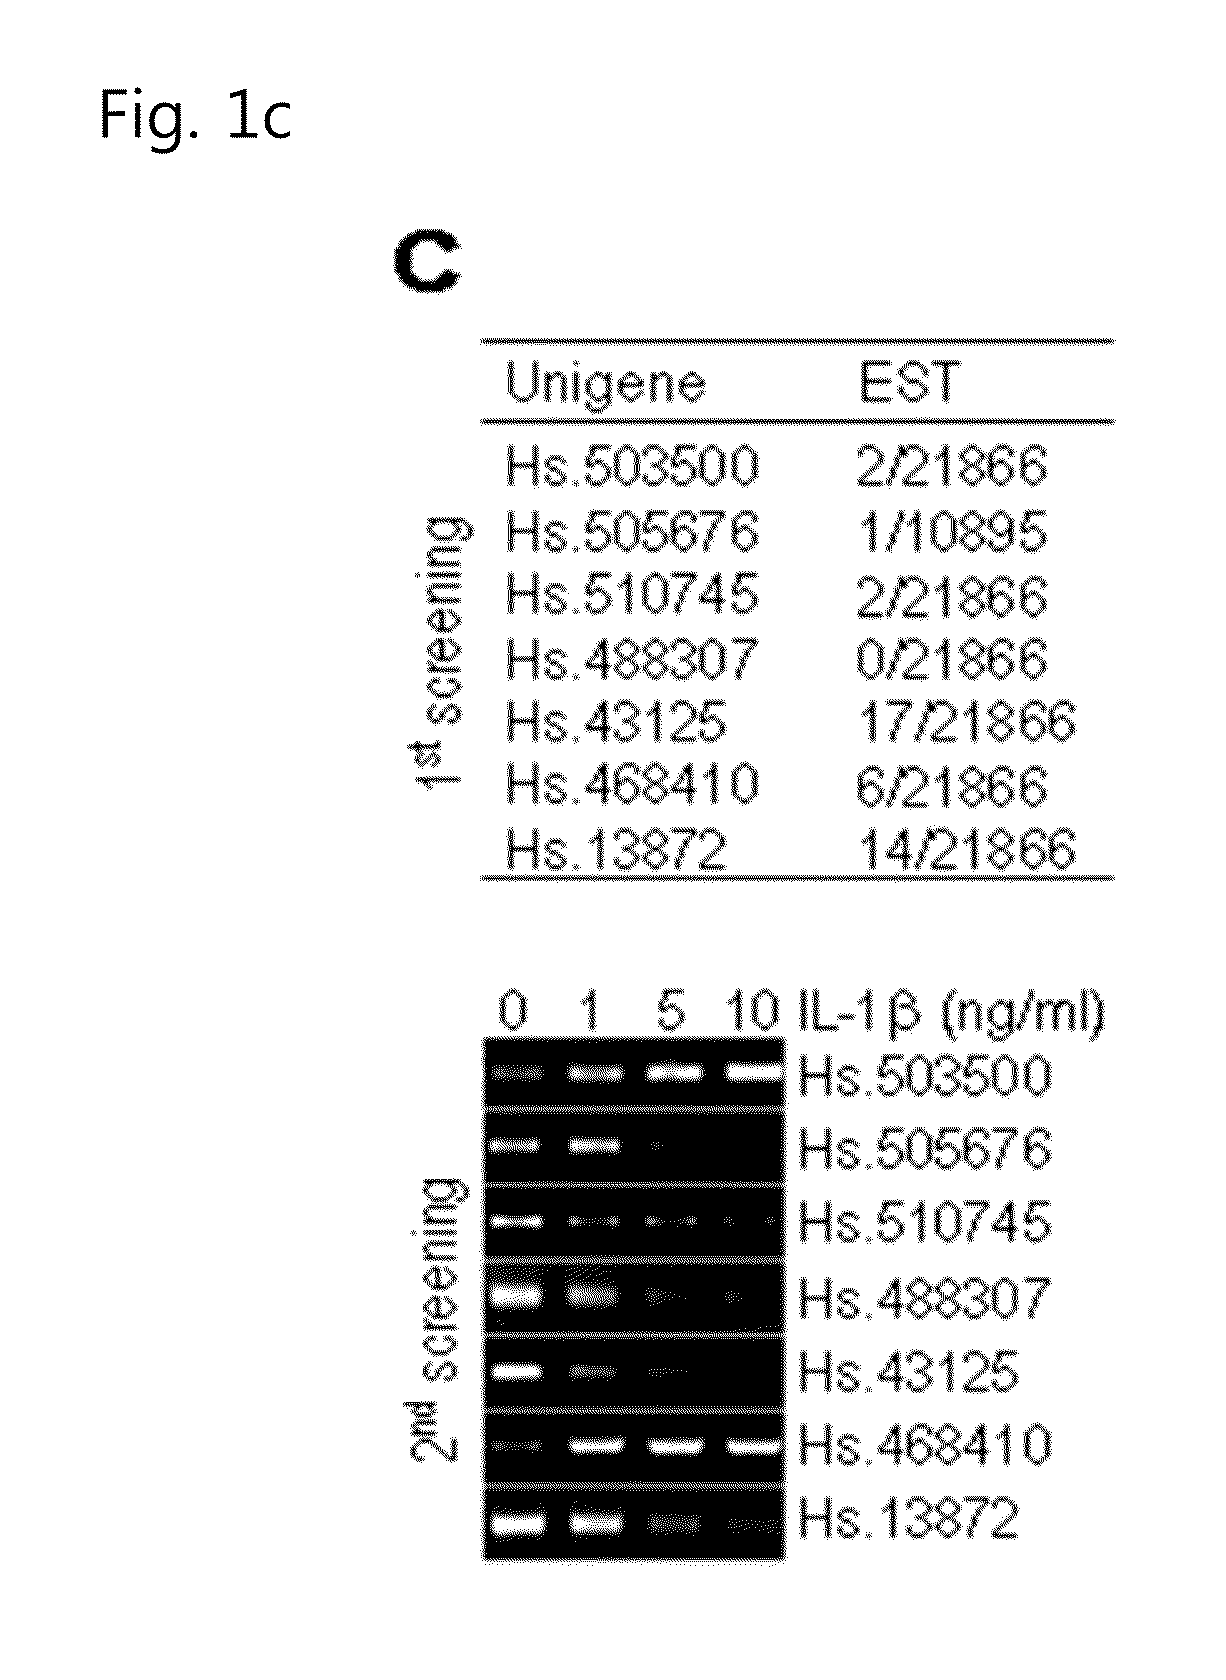 Pharmaceutical composition including an hif-2 alpha inhibitor as an active ingredient for preventing or treating arthritis